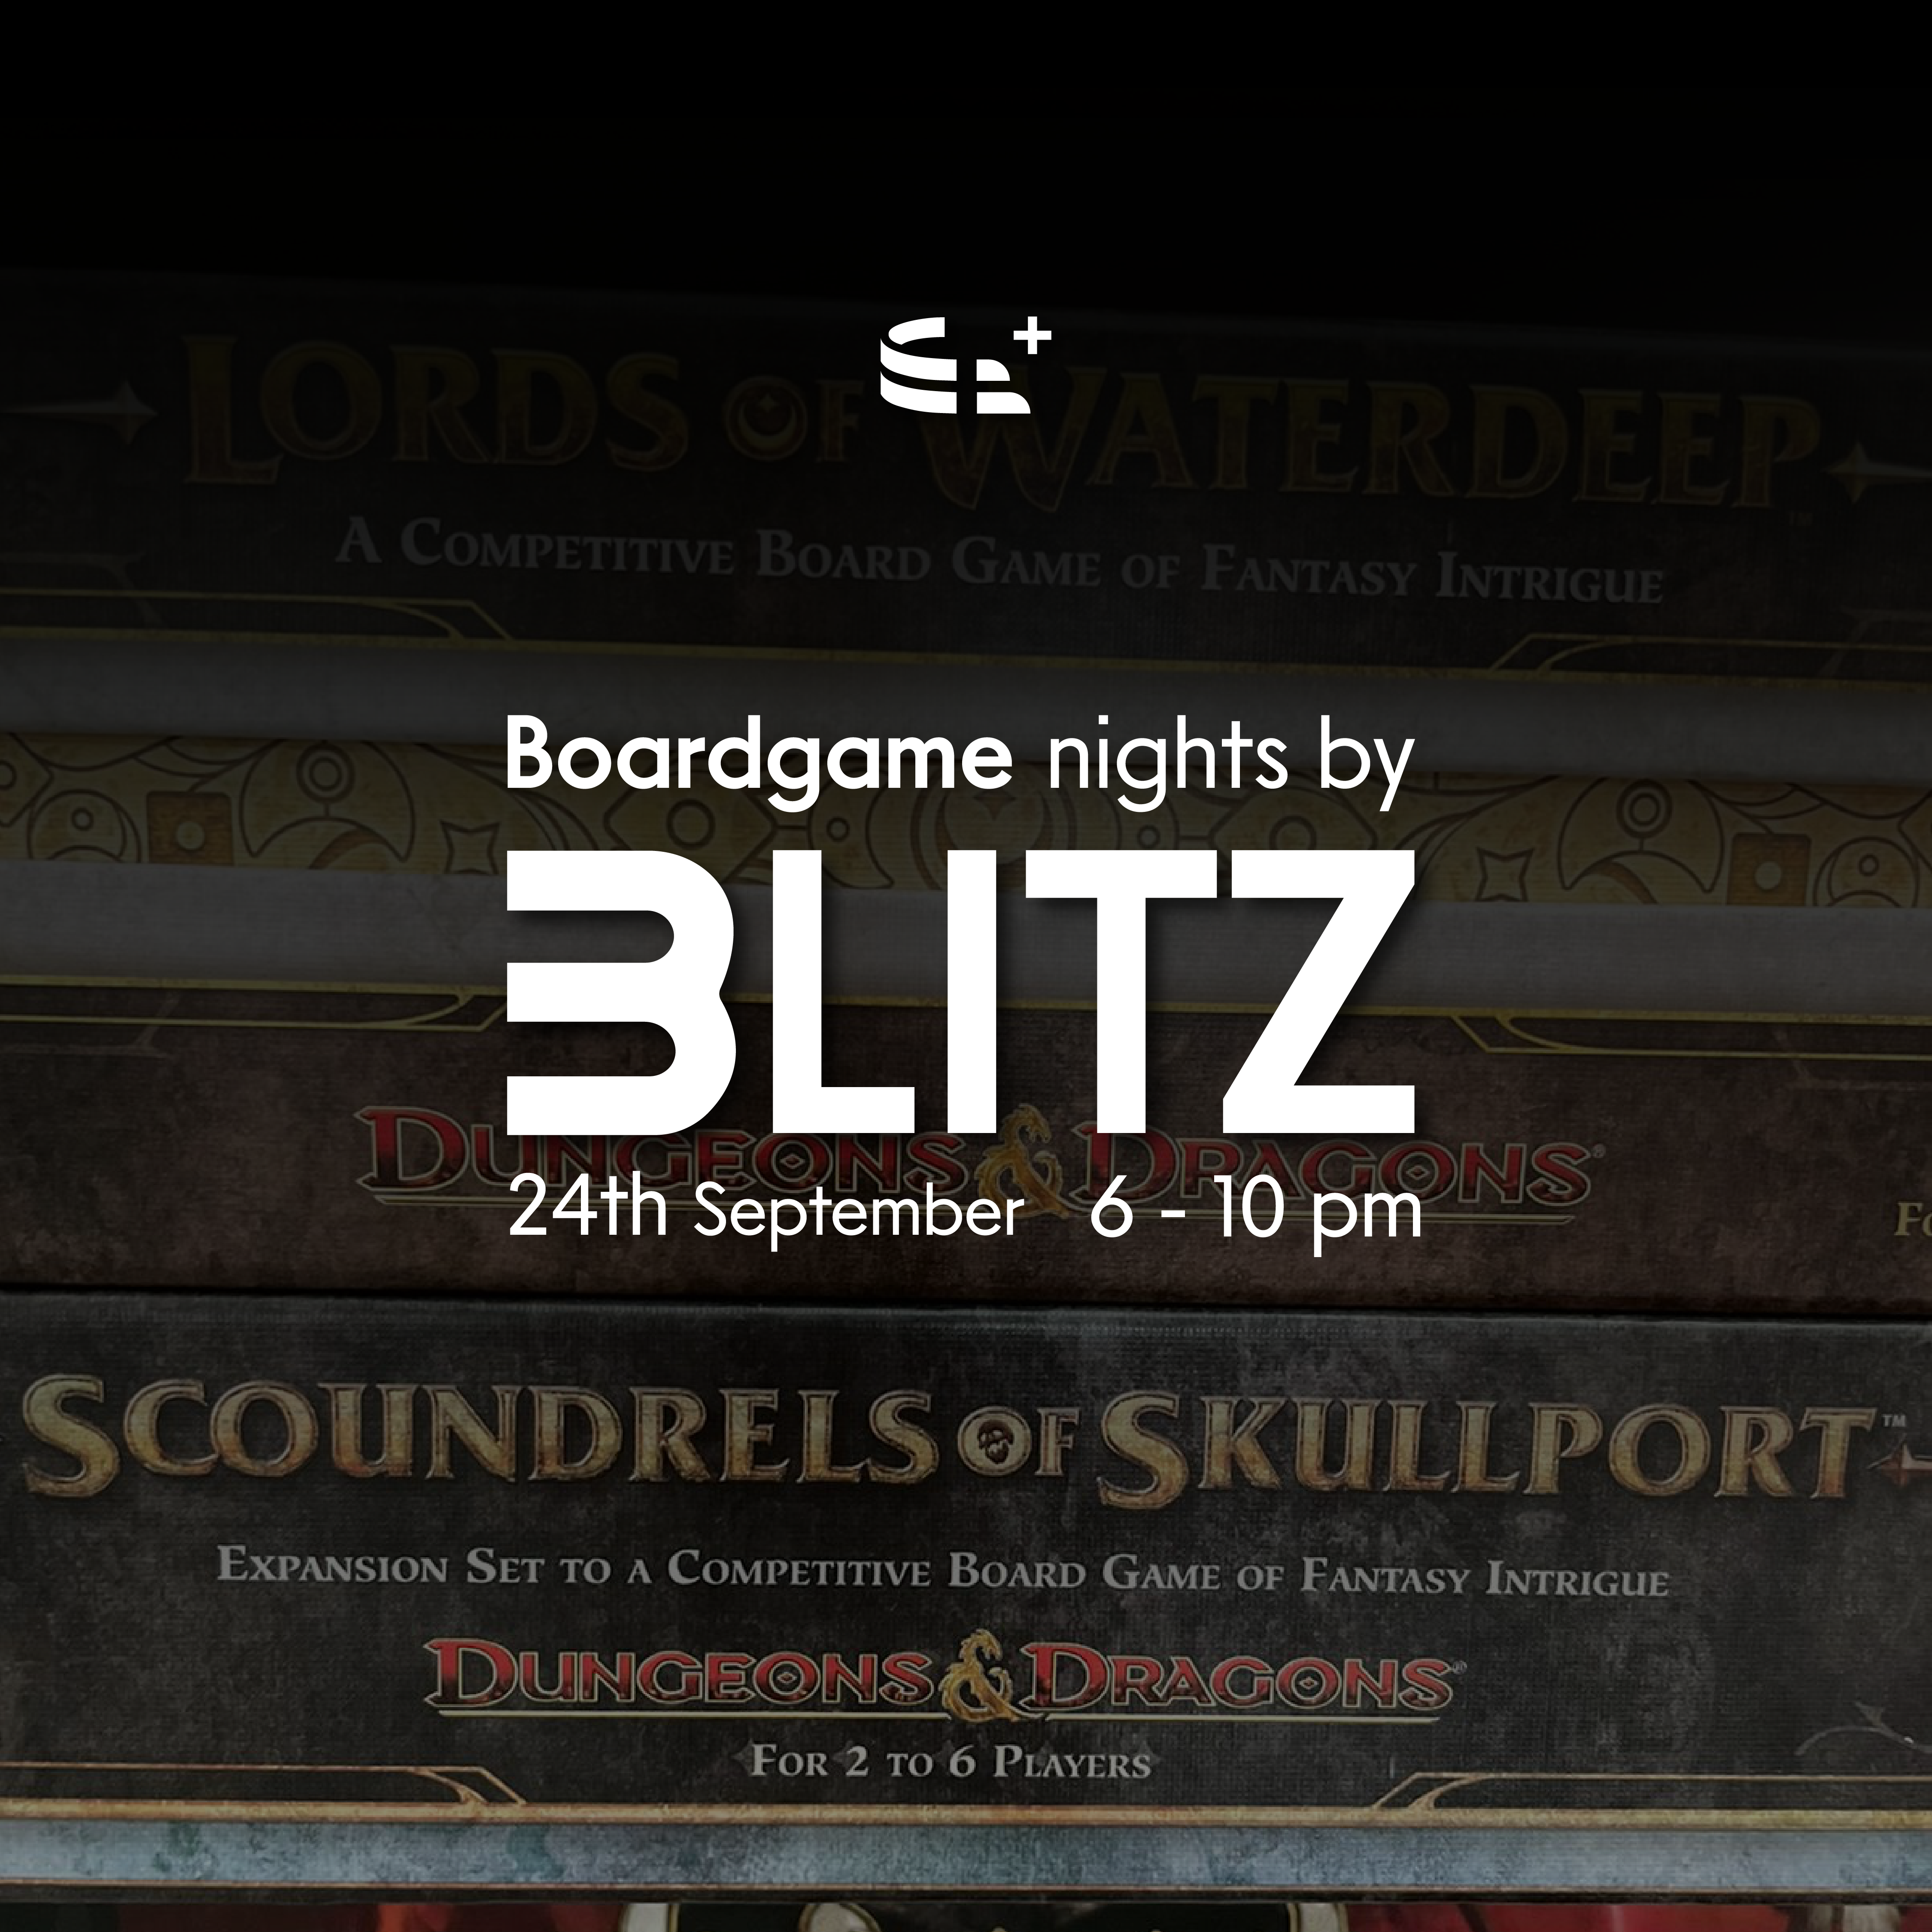 Boardgame nights by Blitz